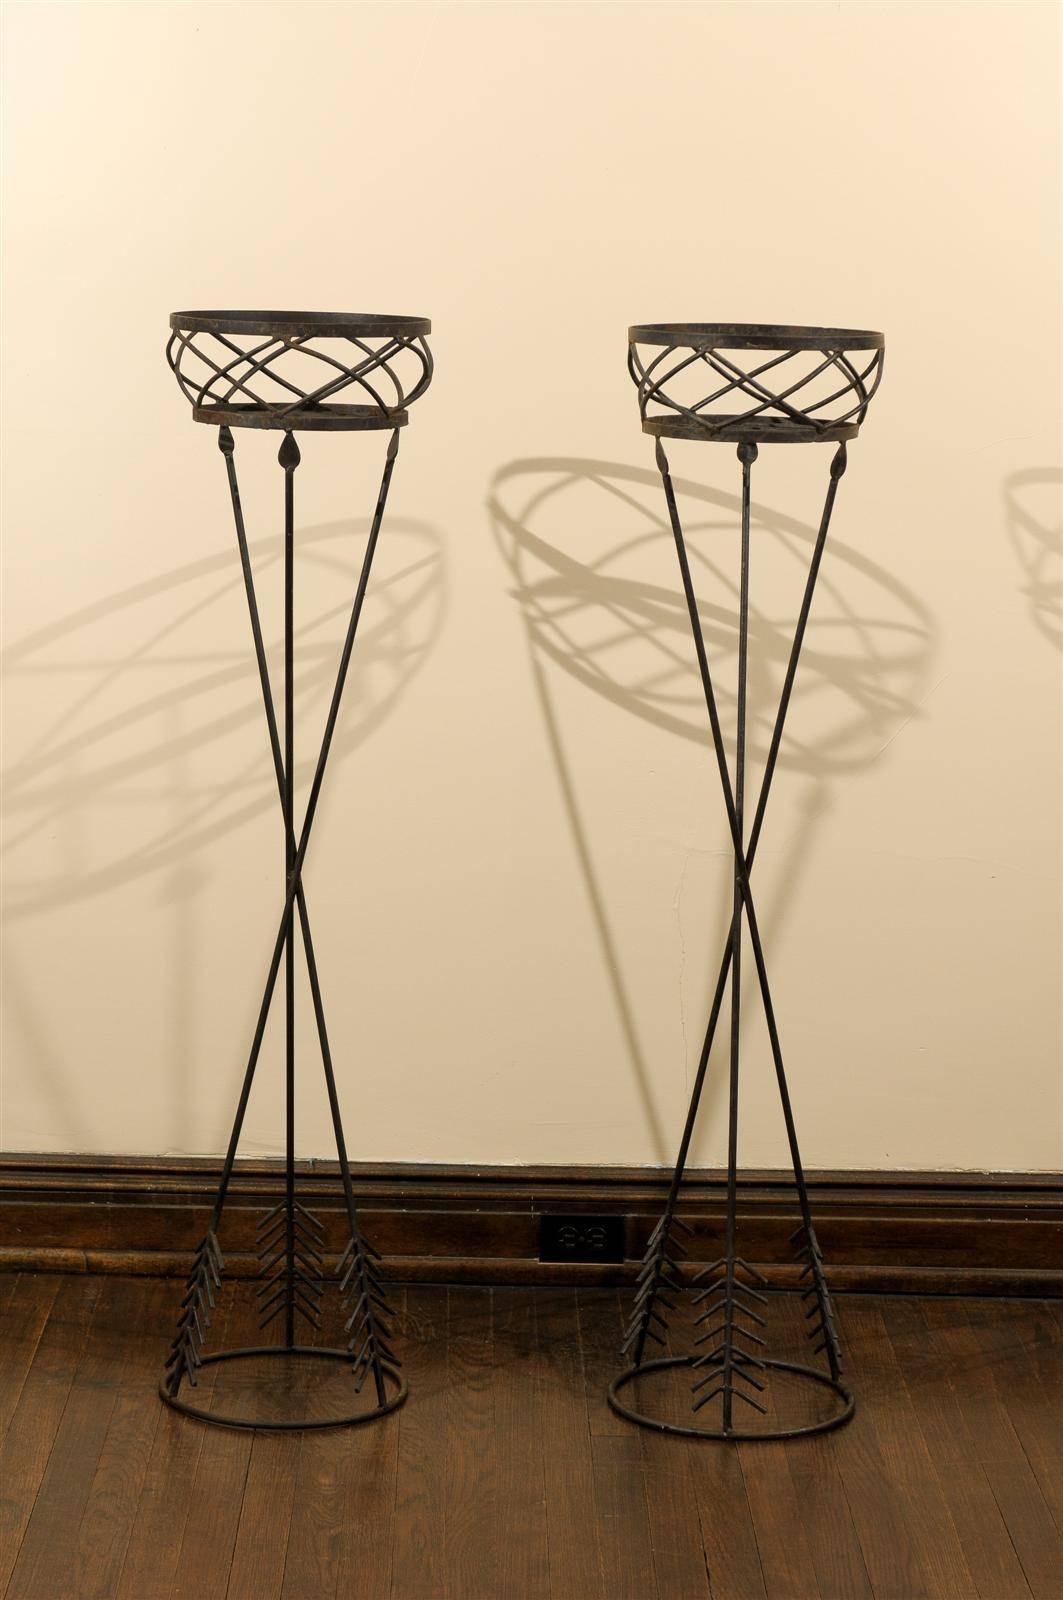 Pair of 20th century iron jardinieres in the neoclassical style.